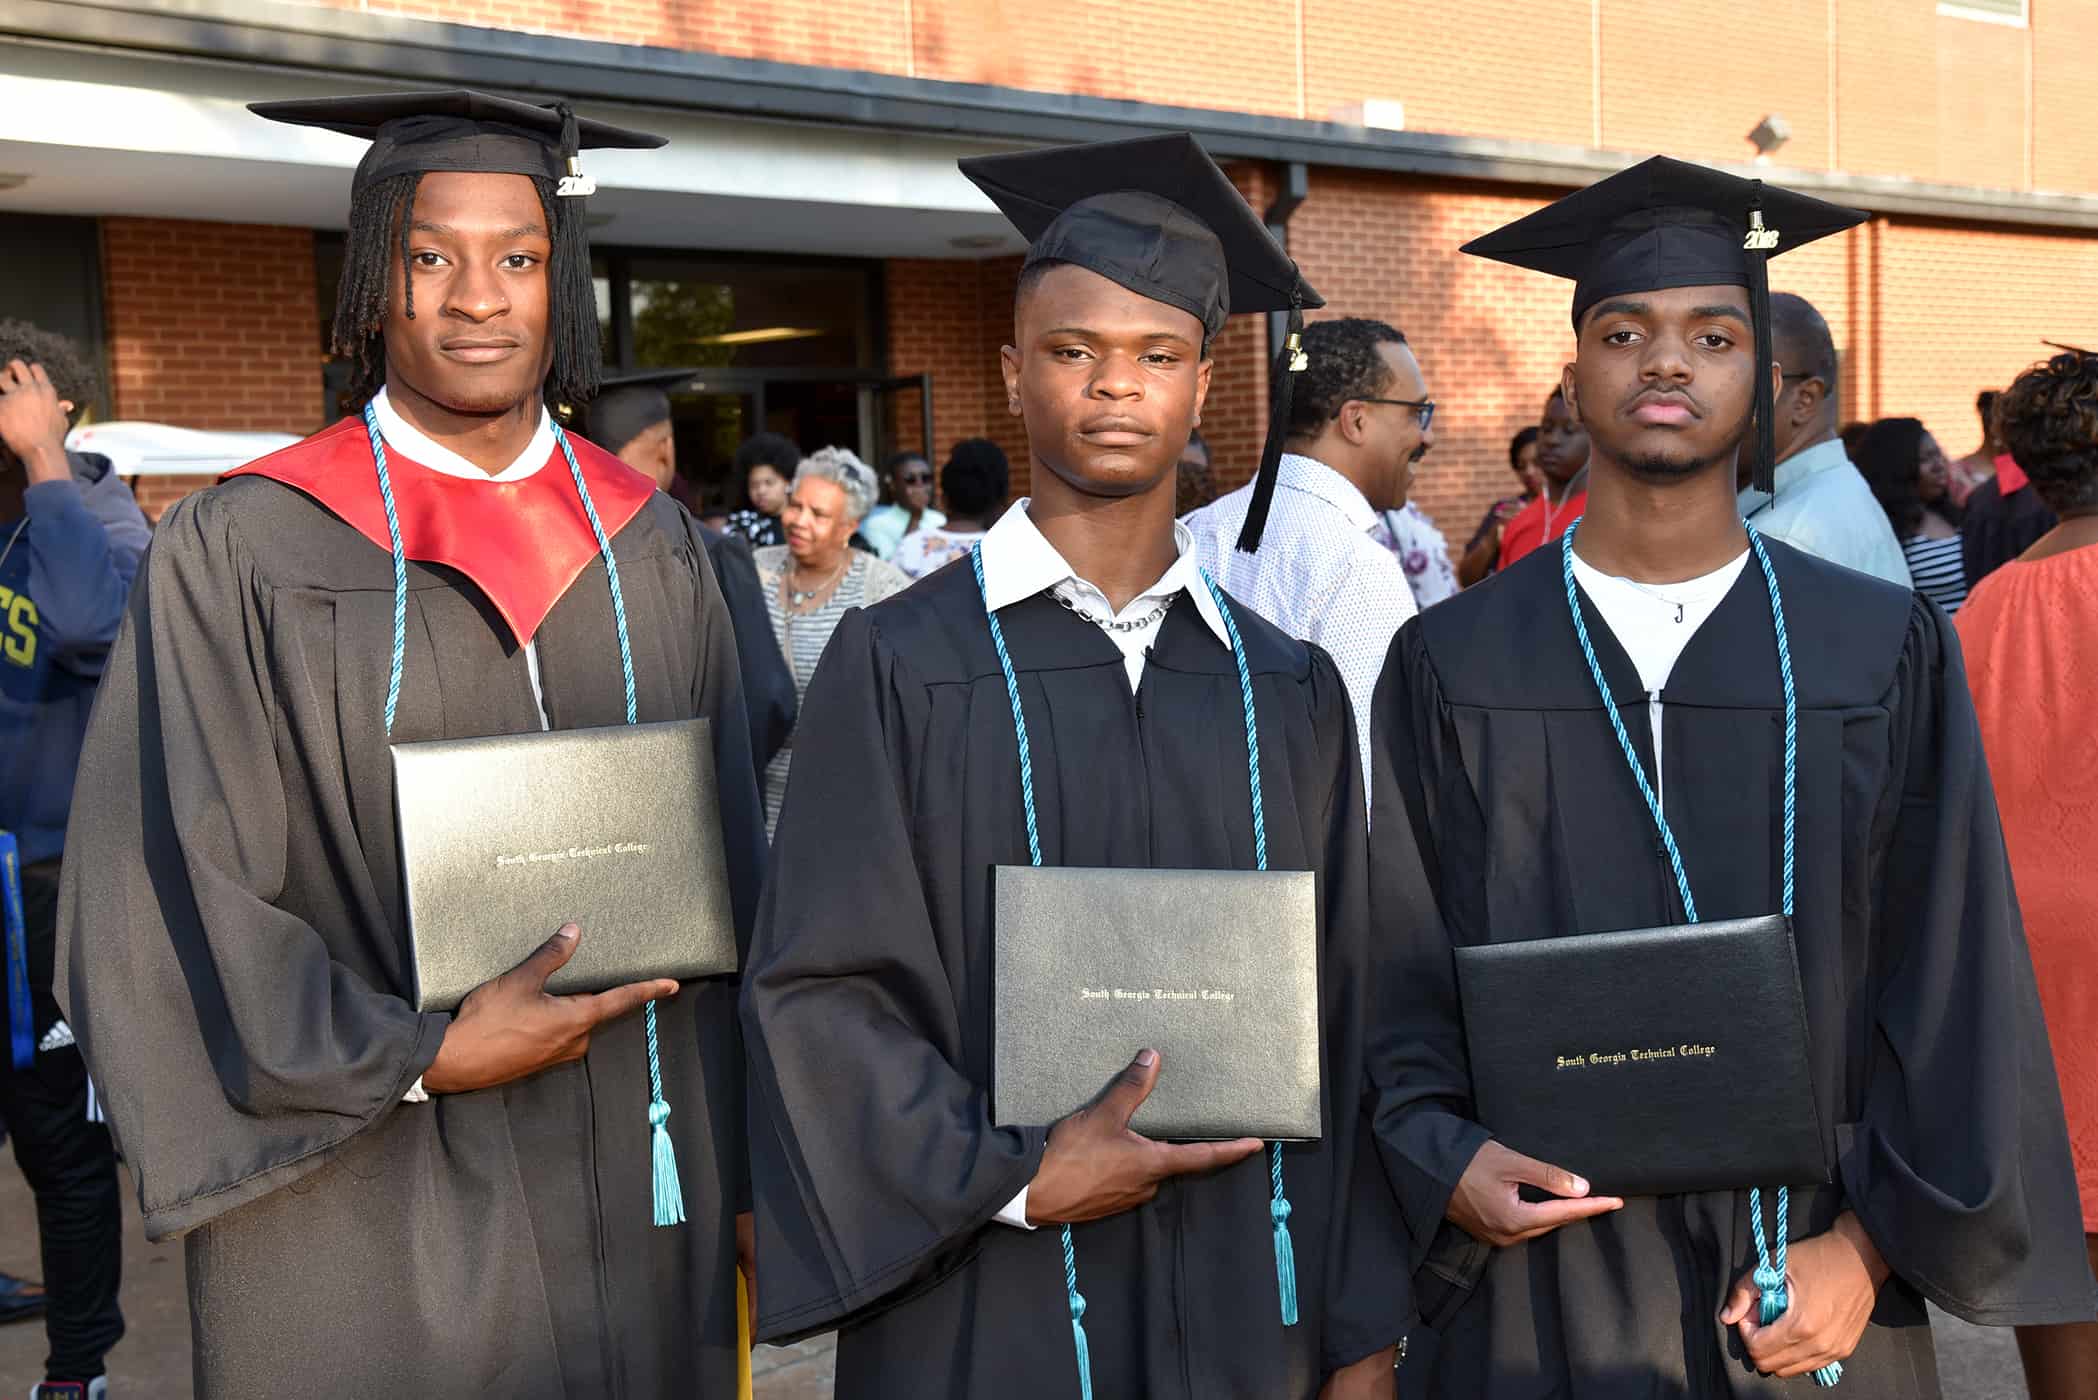 Three males stand together in their black graduation caps and gowns holding their diplomas in front of them. They each wear turquoise cords around their necks.